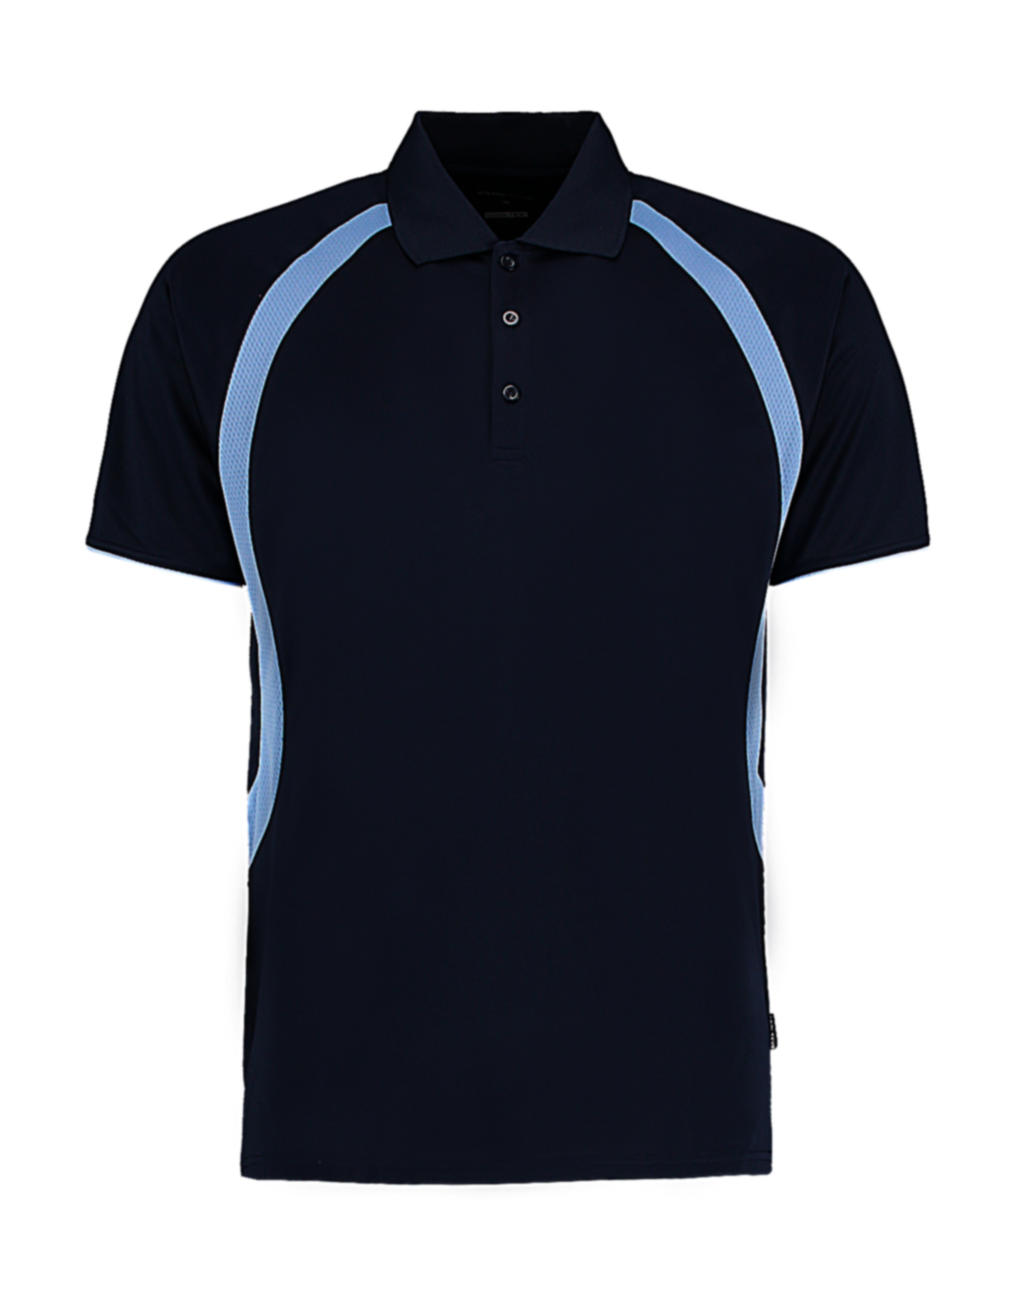  Classic Fit Cooltex? Riviera Polo Shirt in Farbe Navy/Light Blue